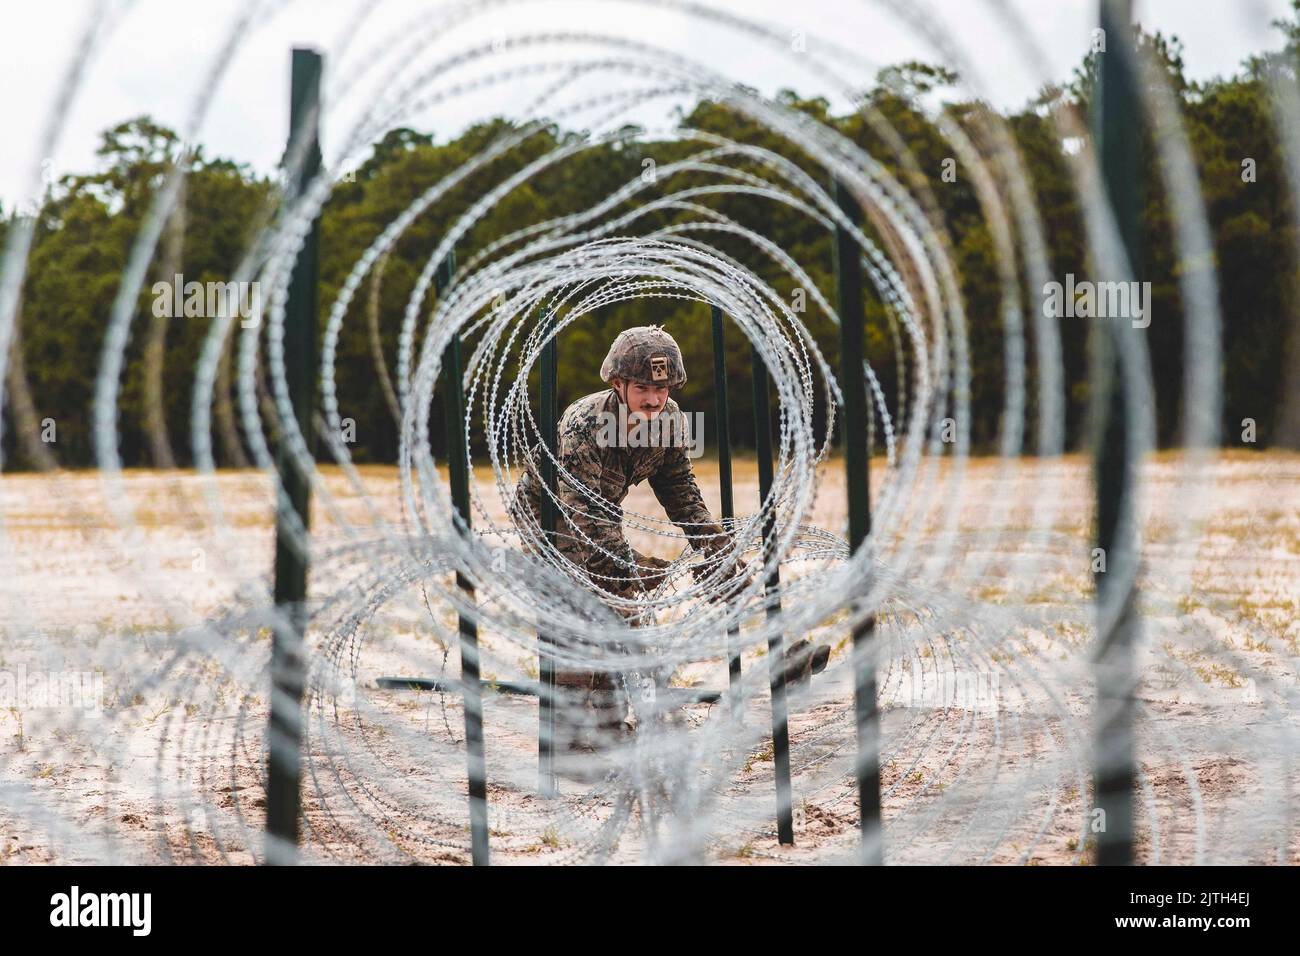 Camp Lejeune, North Carolina, USA. 23rd Aug, 2022. U.S. Marine Corps Cpl. Elijah Ledbetter, a combat engineer with Combat Logistics Battalion 22 (CLB-22), Combat Logistics Regiment 2, 2nd Marine Logistics Group, adjusts concertina wire during a Marine Corps Combat Readiness Evaluation (MCCRE) on Camp Lejeune, North Carolina, August. 23, 2022. CLB-22s MCCRE is the battalion's final evaluation to demonstrate combat readiness through proficiency in core mission essential tasks before they begin a change of operational control (CHOP) to the 26th Marine Expeditionary Unit. (Credit Image: © U.S. Stock Photo